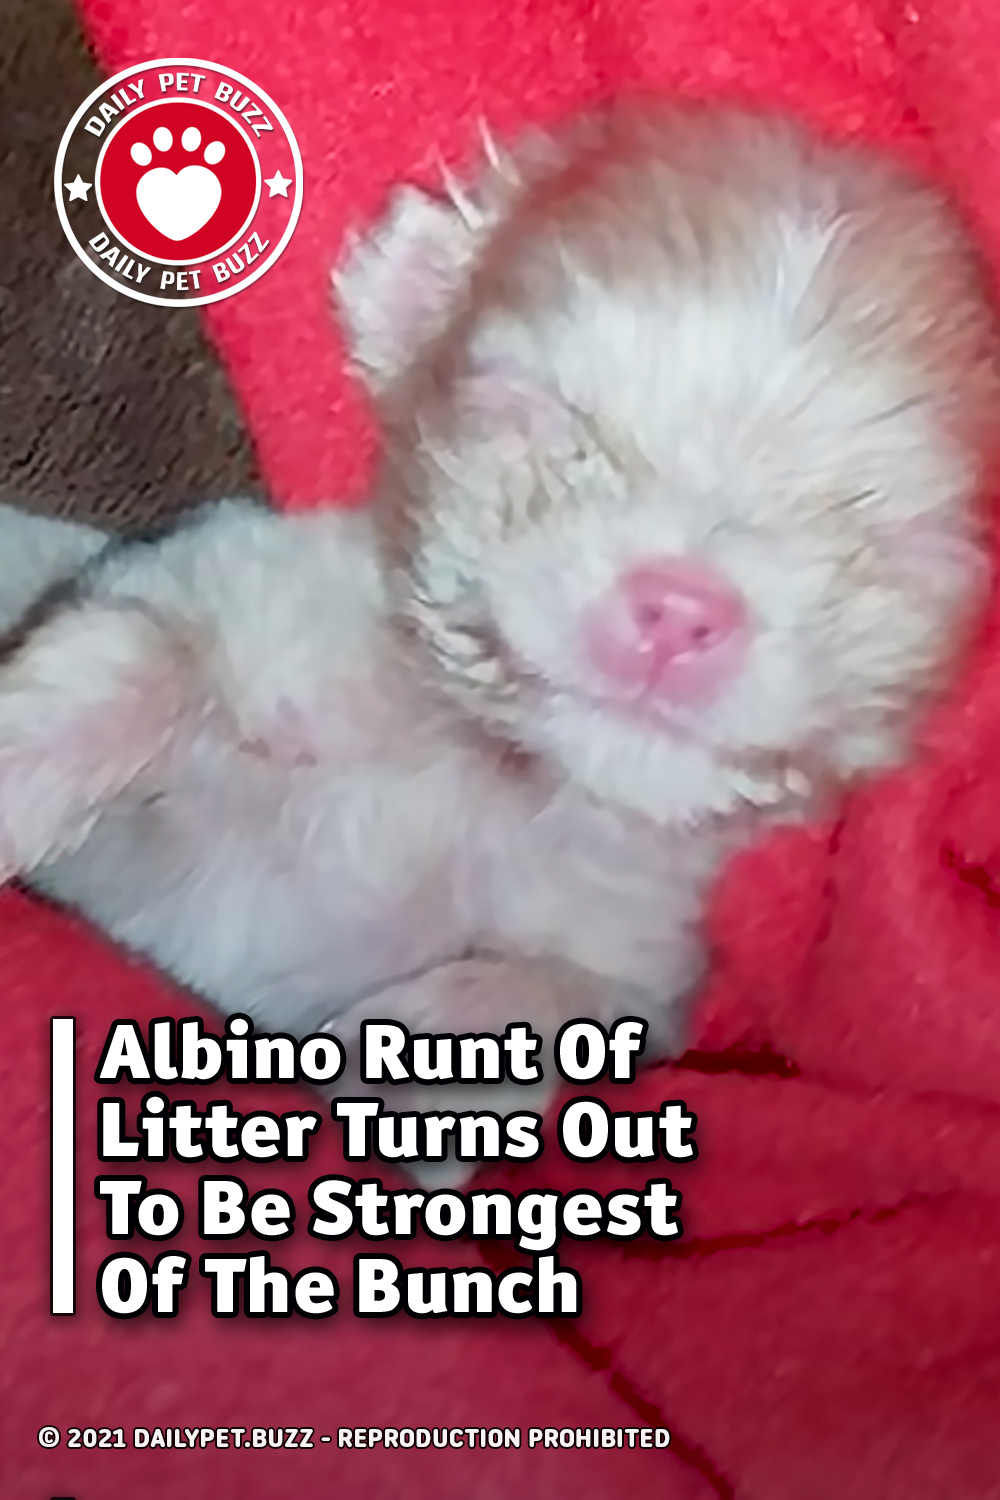 Albino Runt Of Litter Turns Out To Be Strongest Of The Bunch